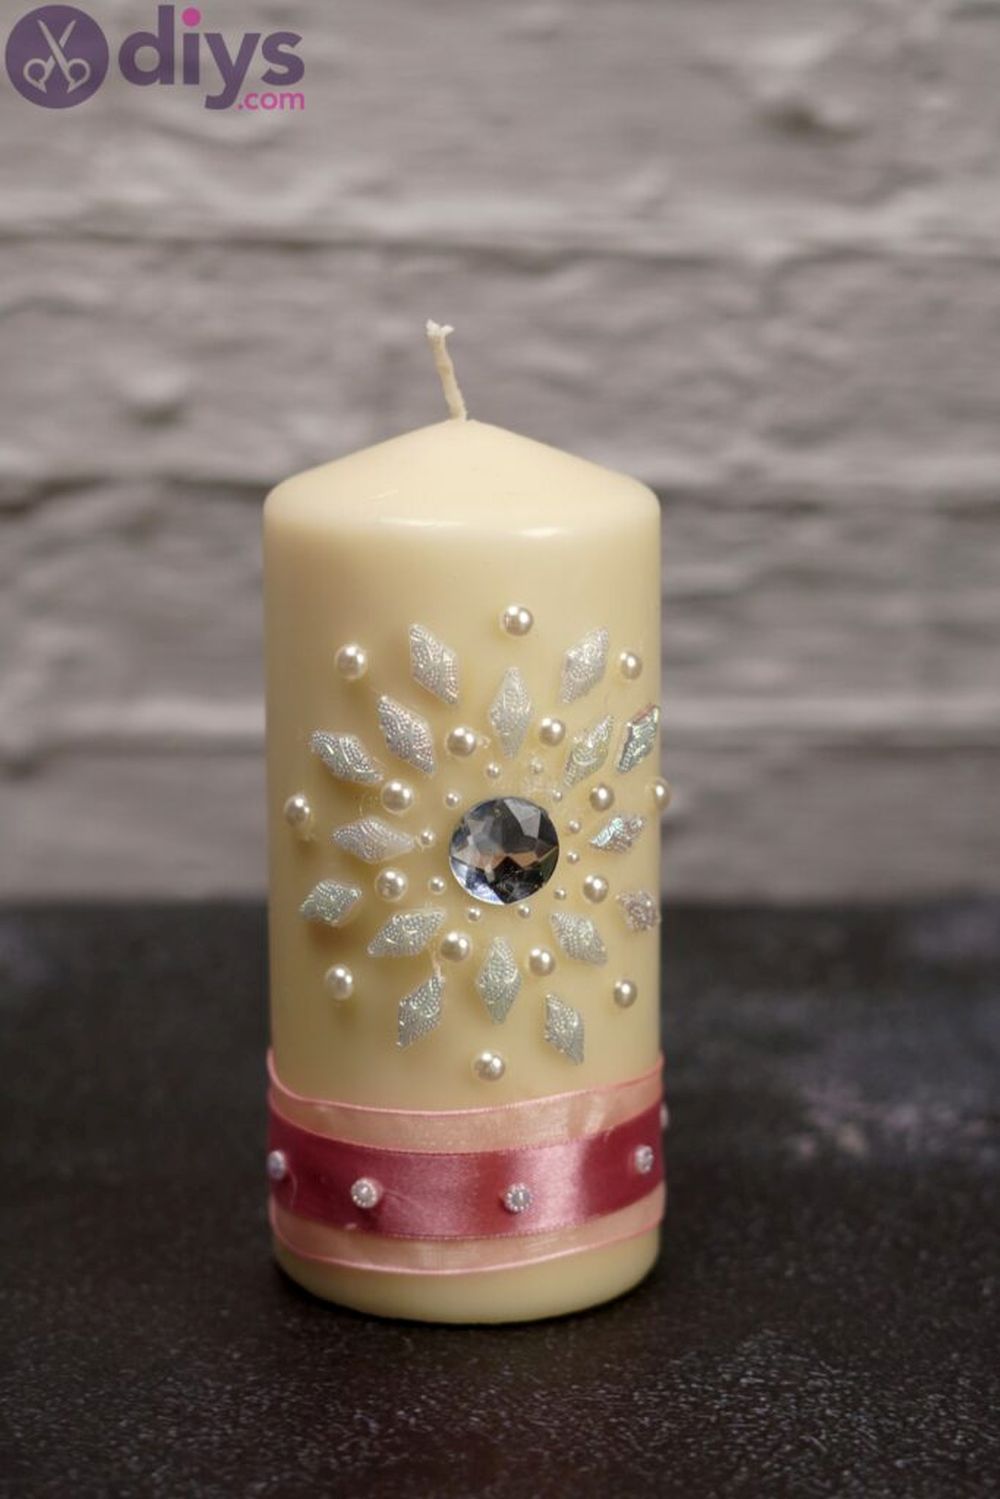 Candle art easy valentine's day crafts 